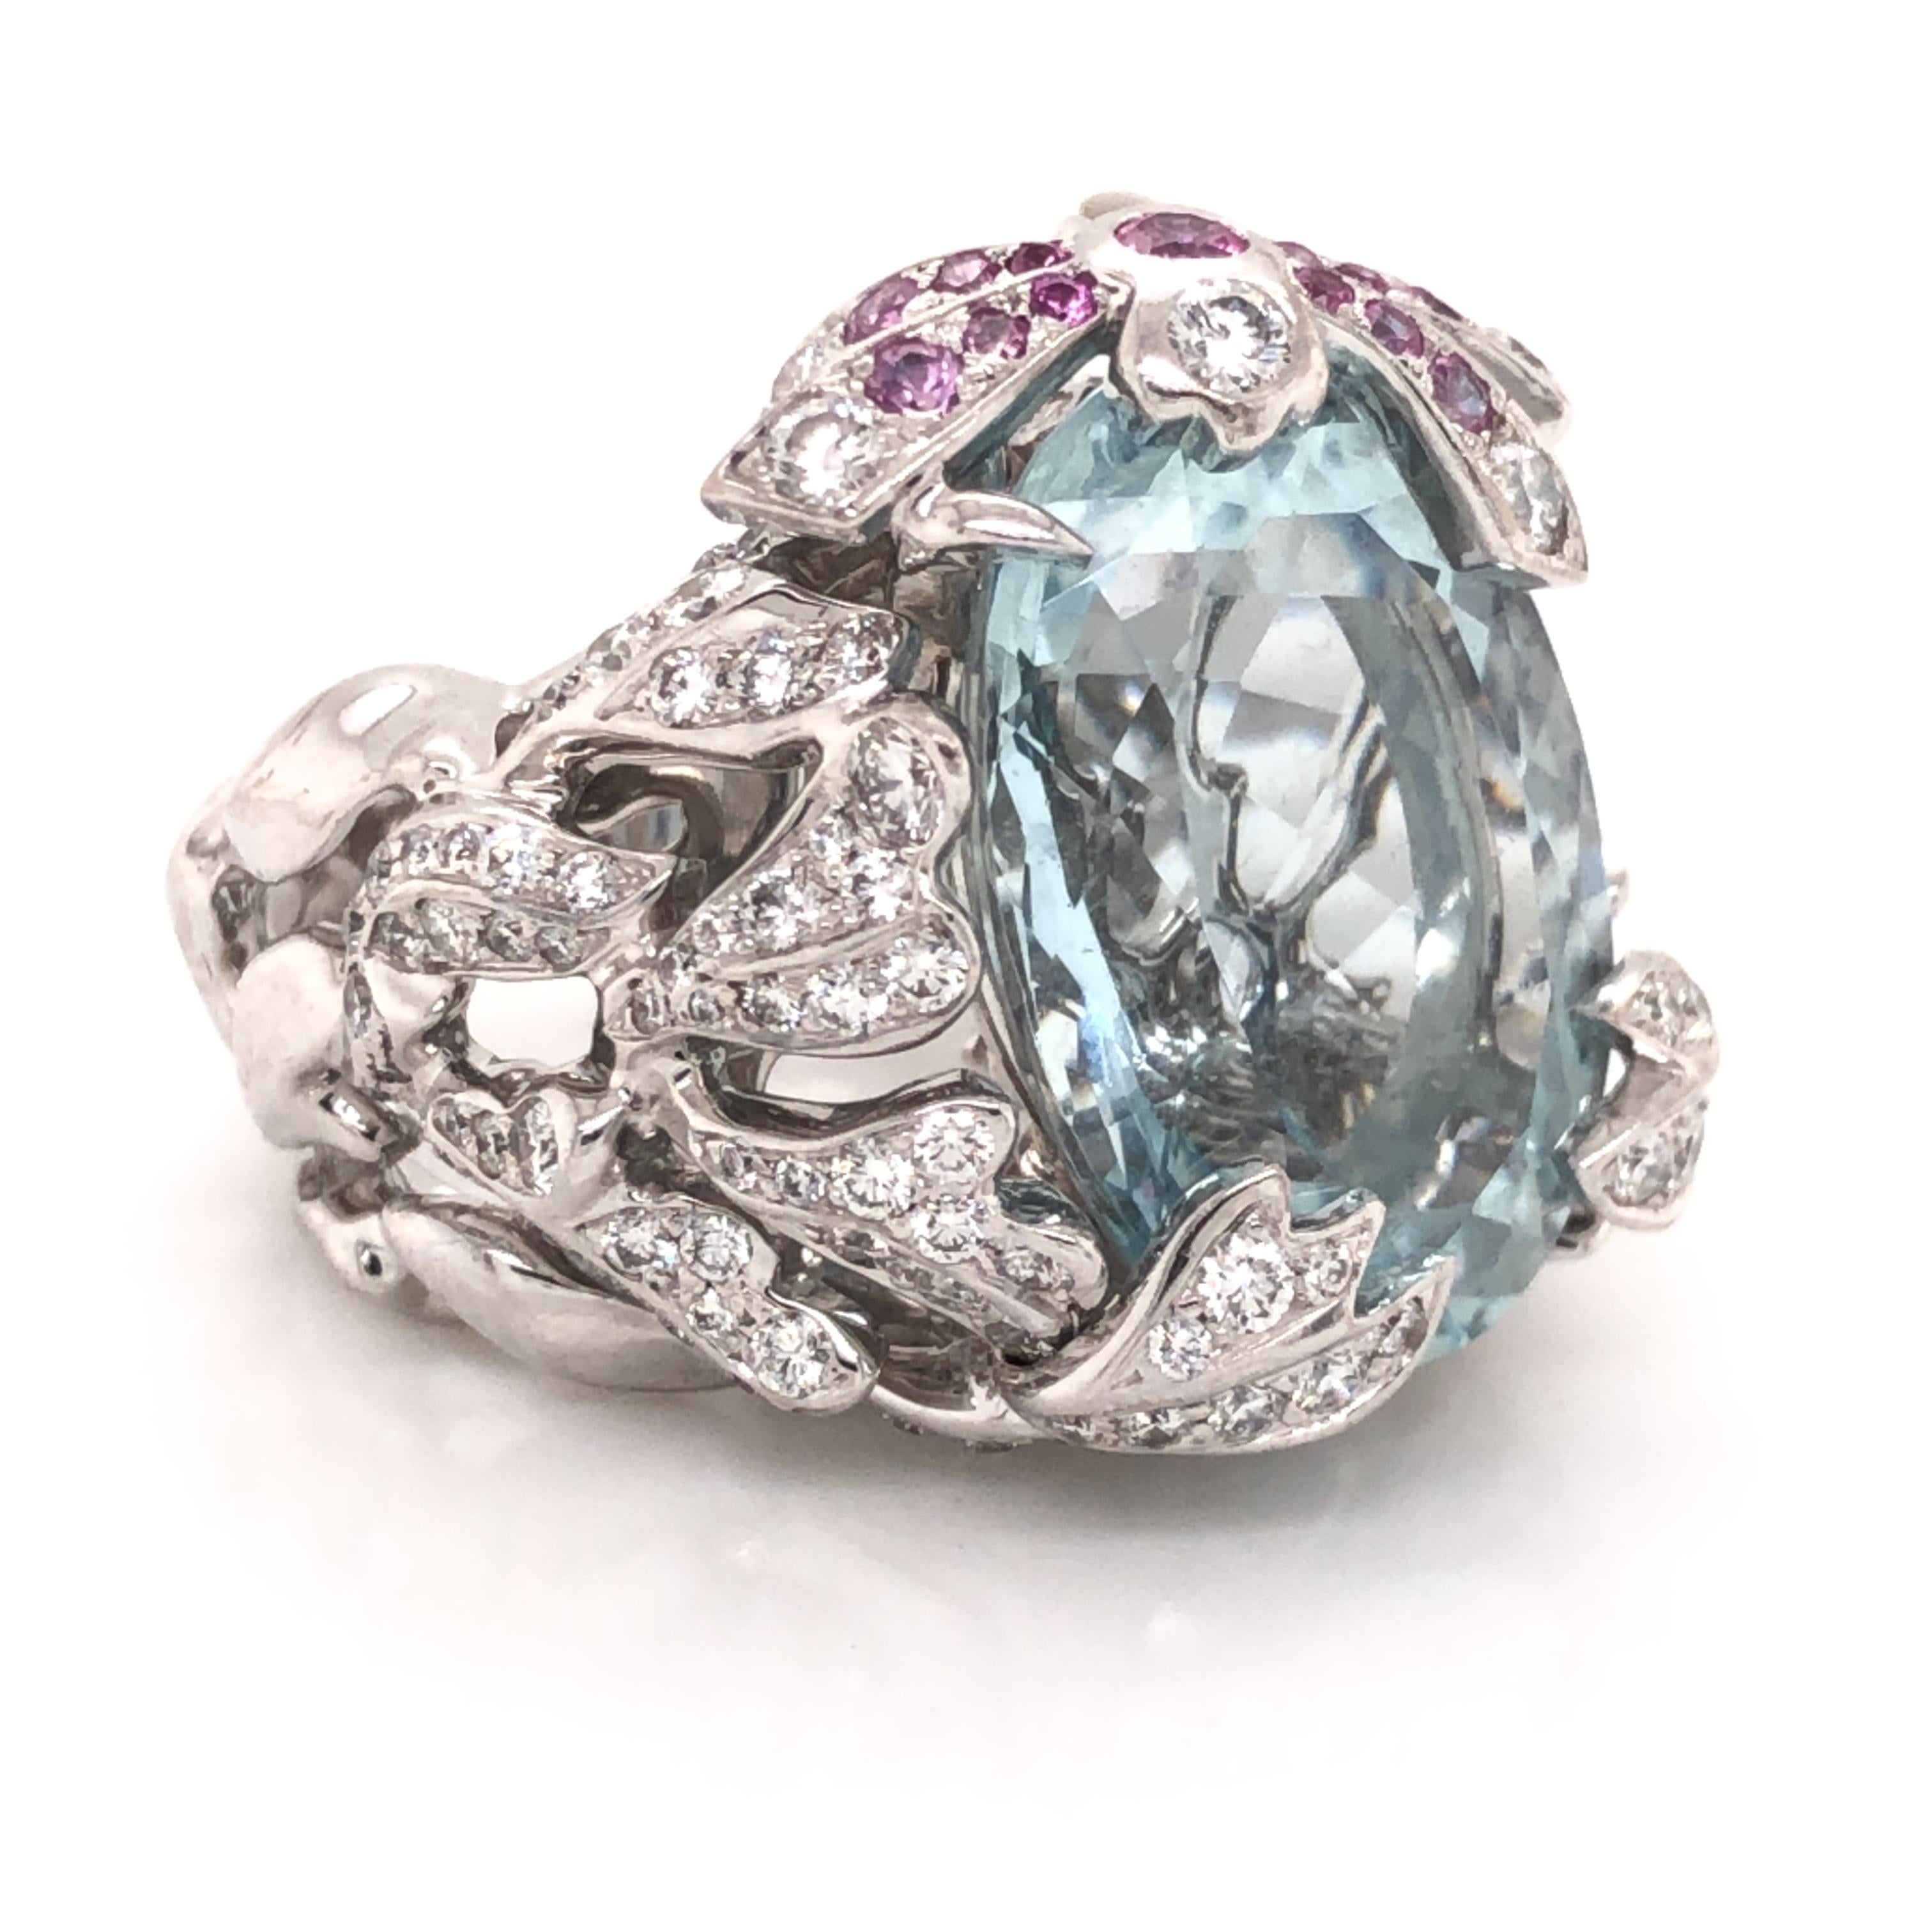 Amazing creation from famed designer Chritian Dior. This gorgeous ring is highlighted with one aqua marine gemstone set in the center, oval in shape that is approximately 18-20 ct. Details in this ring are phenomenal as the design is covered in